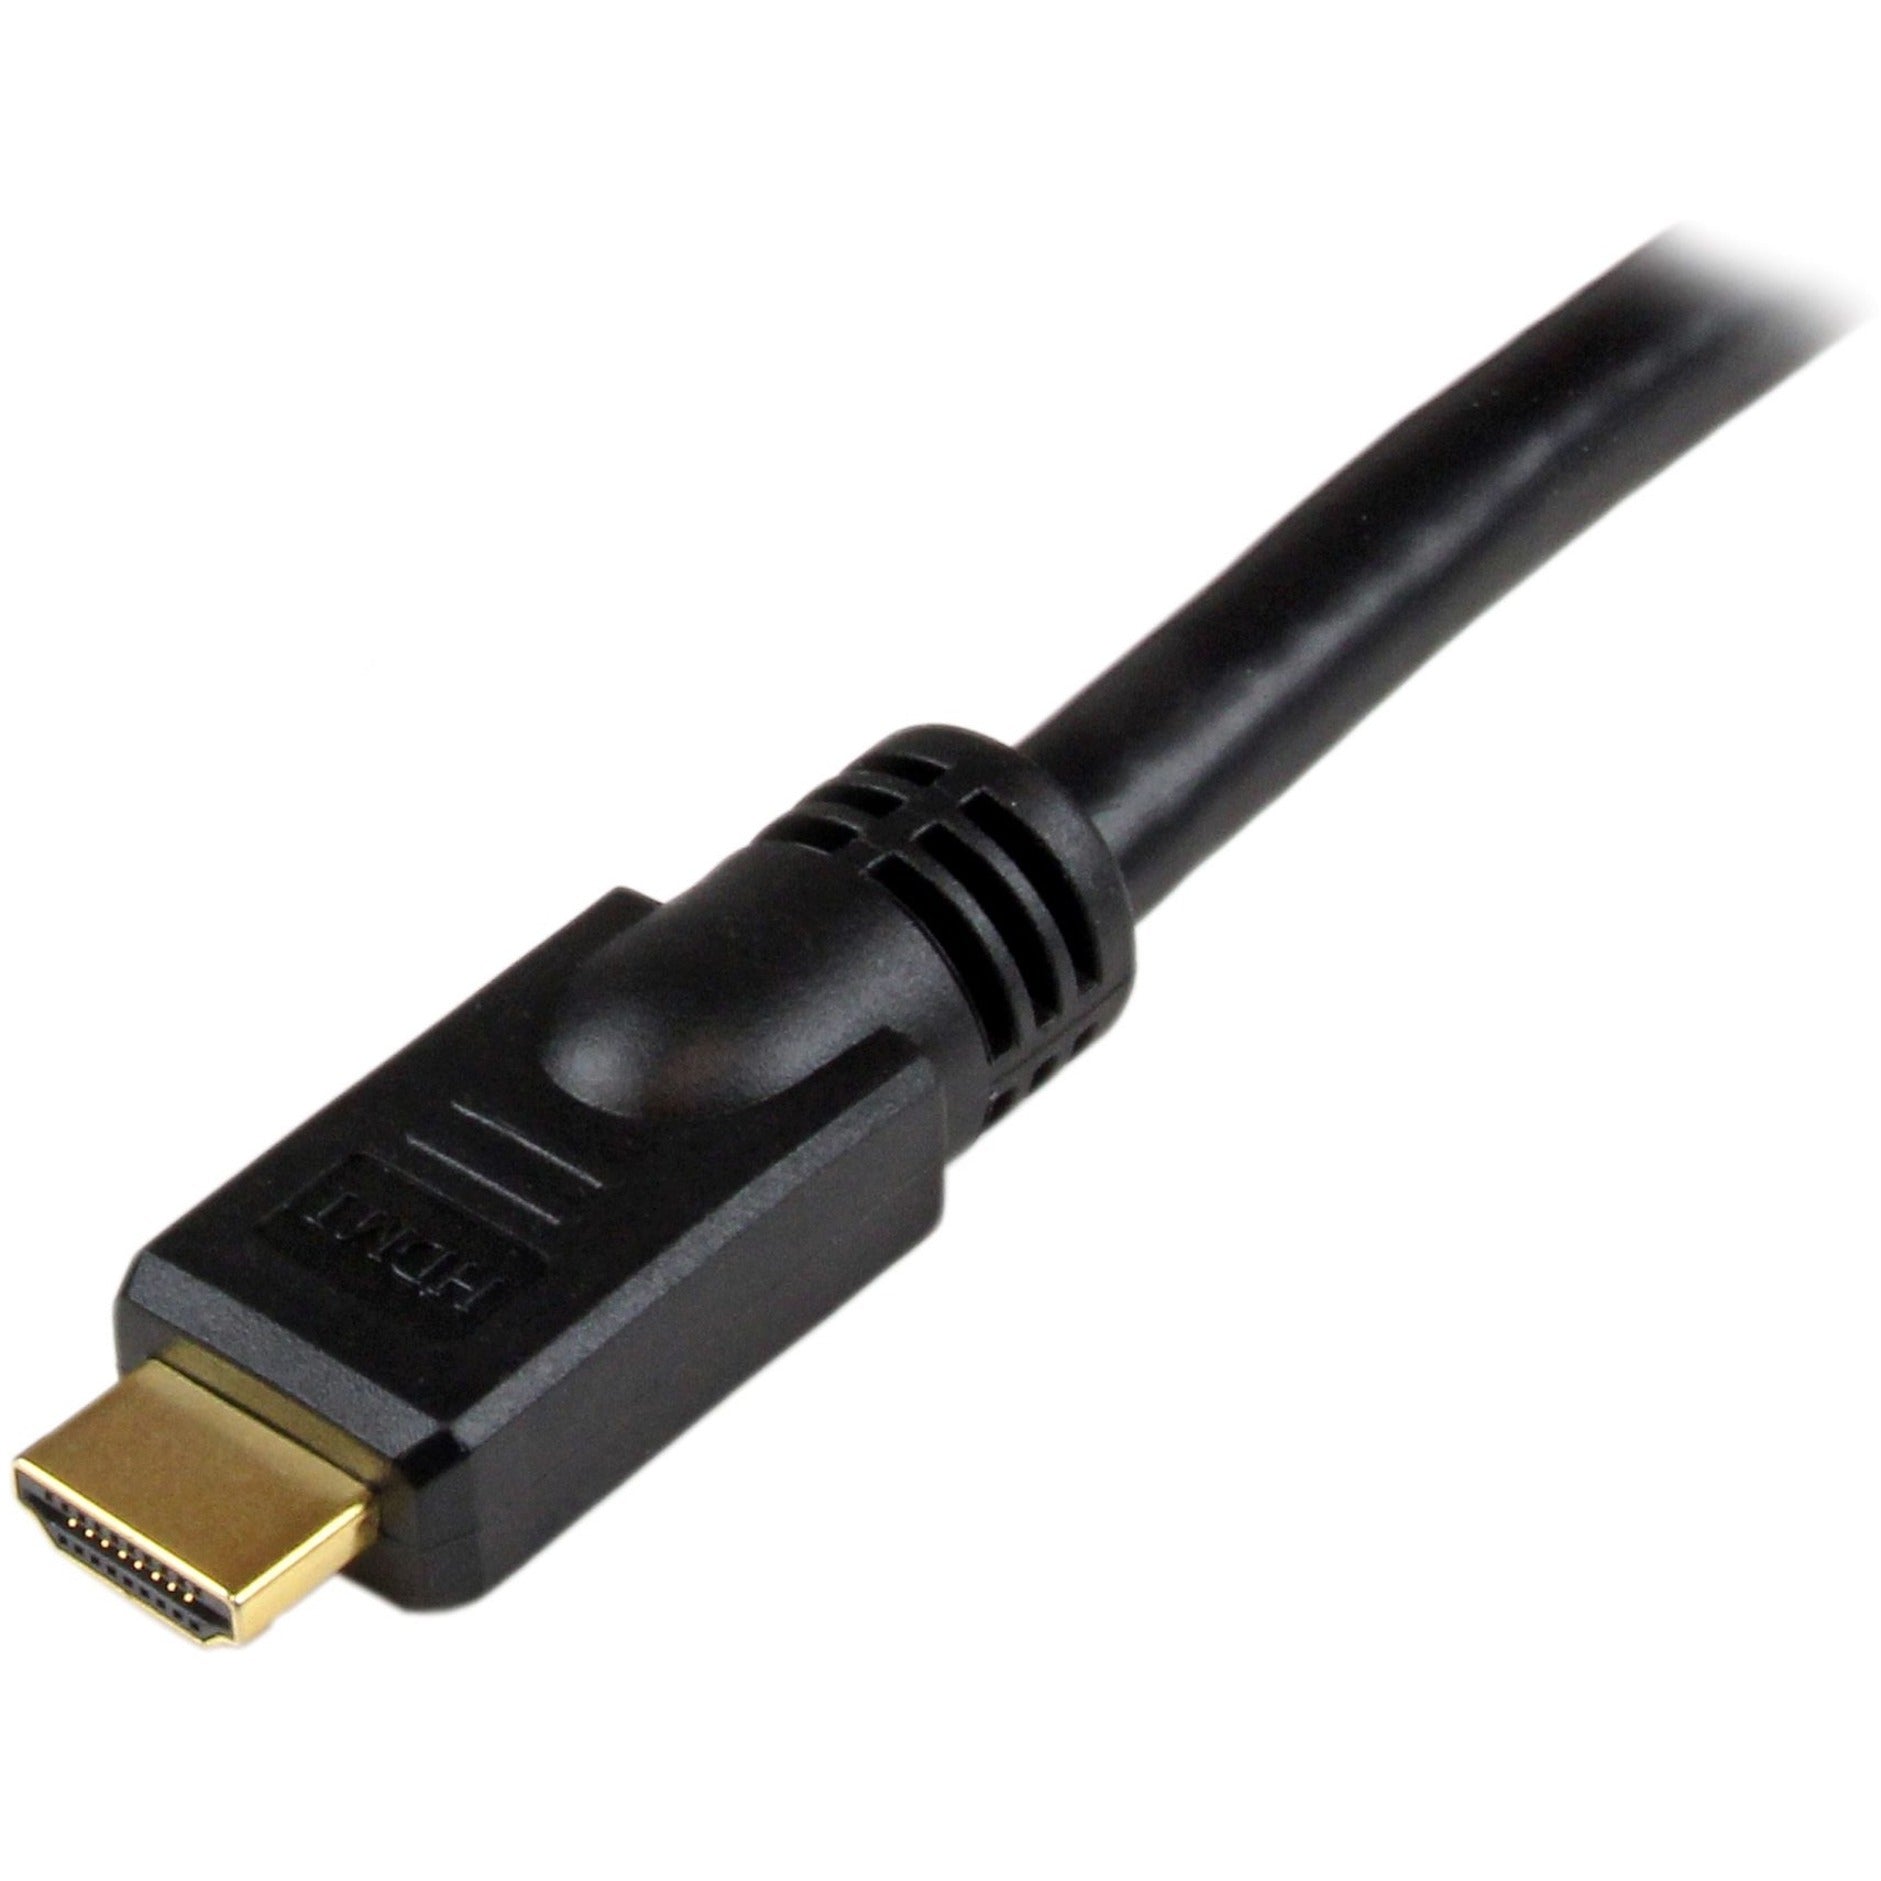 StarTech.com HDMIDVIMM20 20 ft HDMI to DVI-D Cable - M/M, Molded, Passive, Strain Relief, Copper Conductor, Shielding, 24 AWG, Nickel Plating, Black